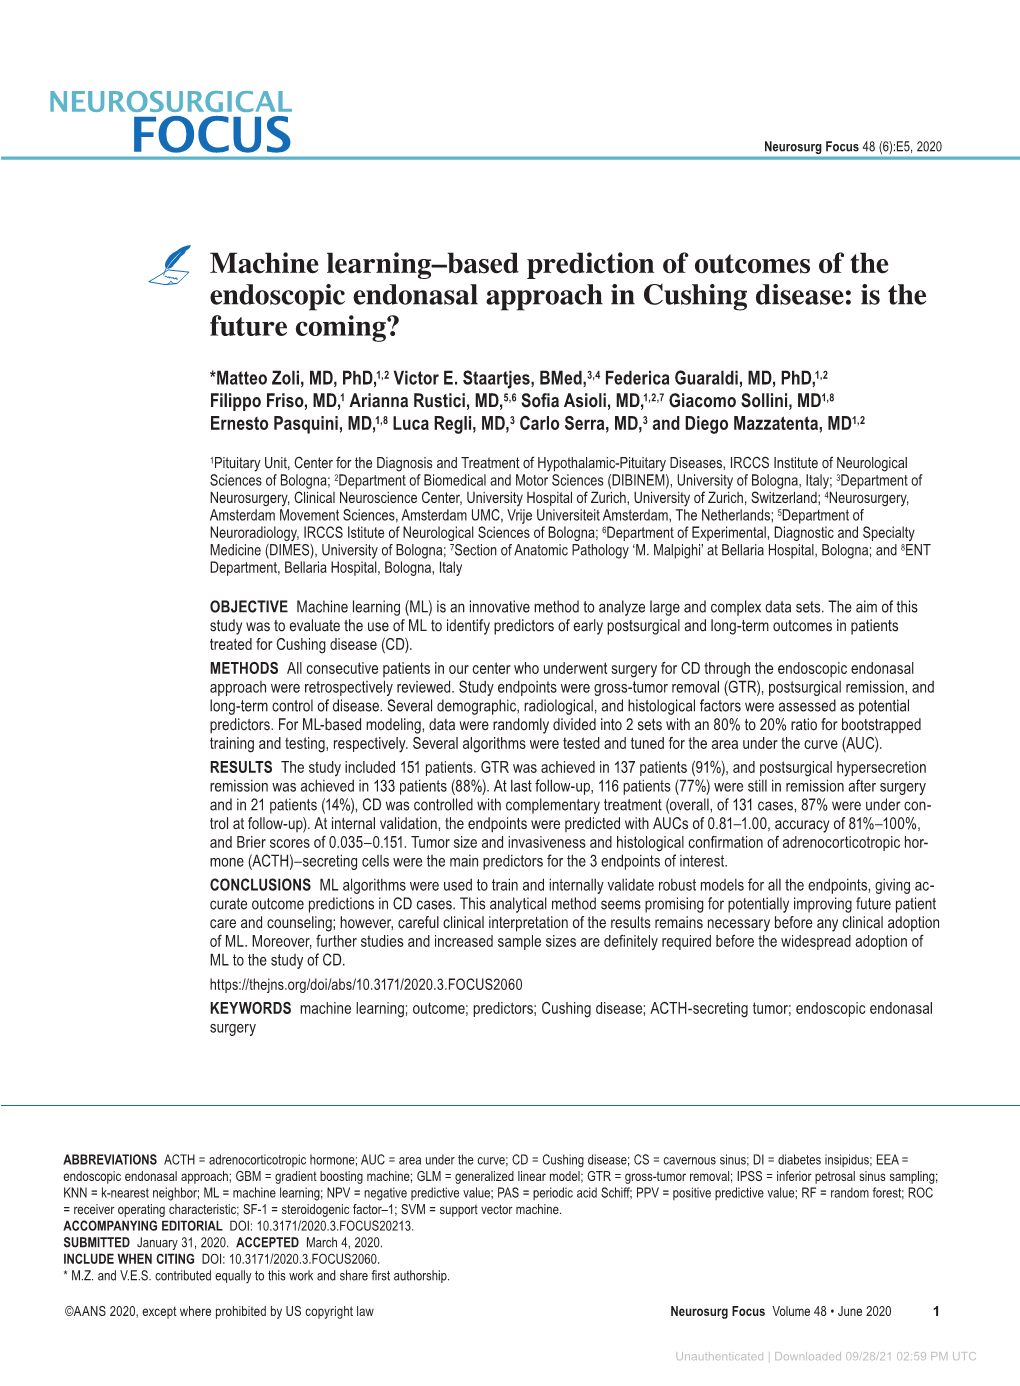 Machine Learning–Based Prediction of Outcomes of the Endoscopic Endonasal Approach in Cushing Disease: Is the Future Coming?